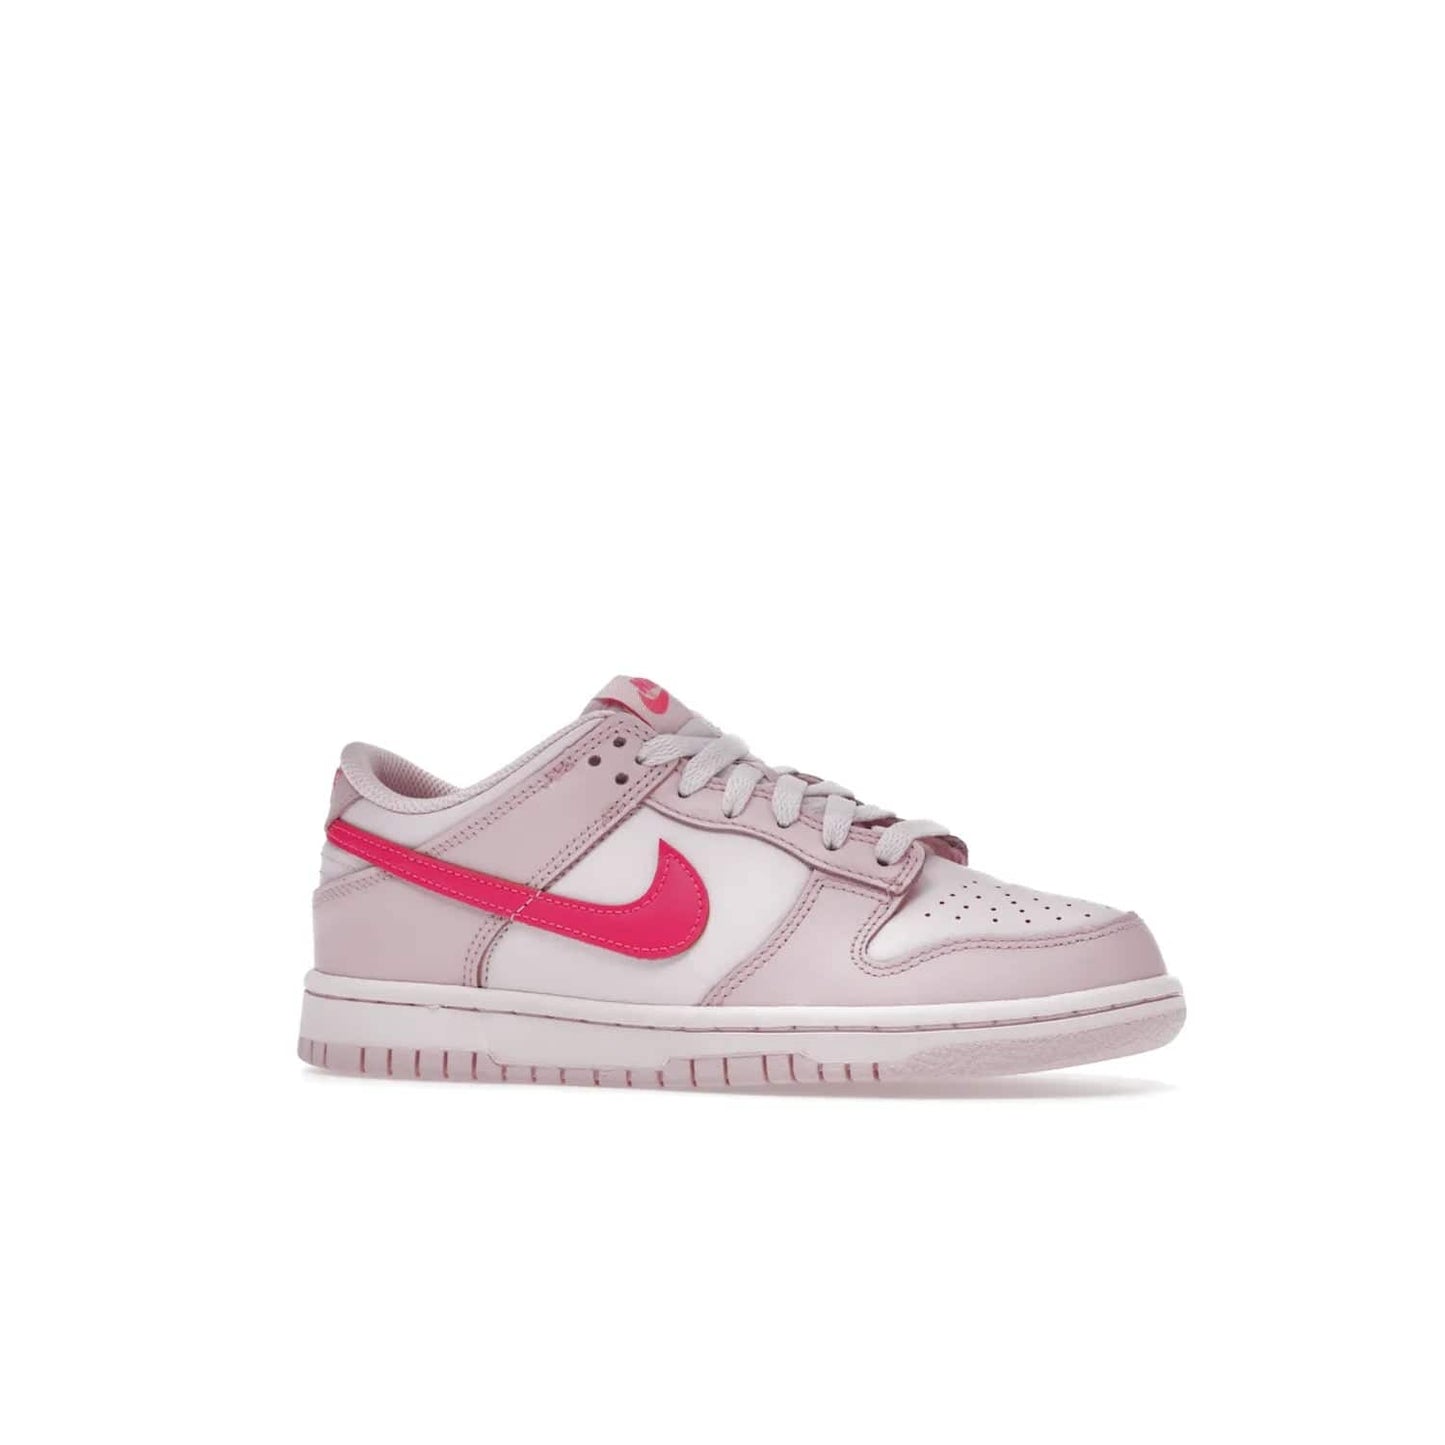 Nike Dunk Low Triple Pink (GS) - Image 3 - Only at www.BallersClubKickz.com - The Nike Dunk Low Triple Pink provides bold style in GS sizing. Featuring 3 distinct shades of pink and Nike branding, the shoe stands out.